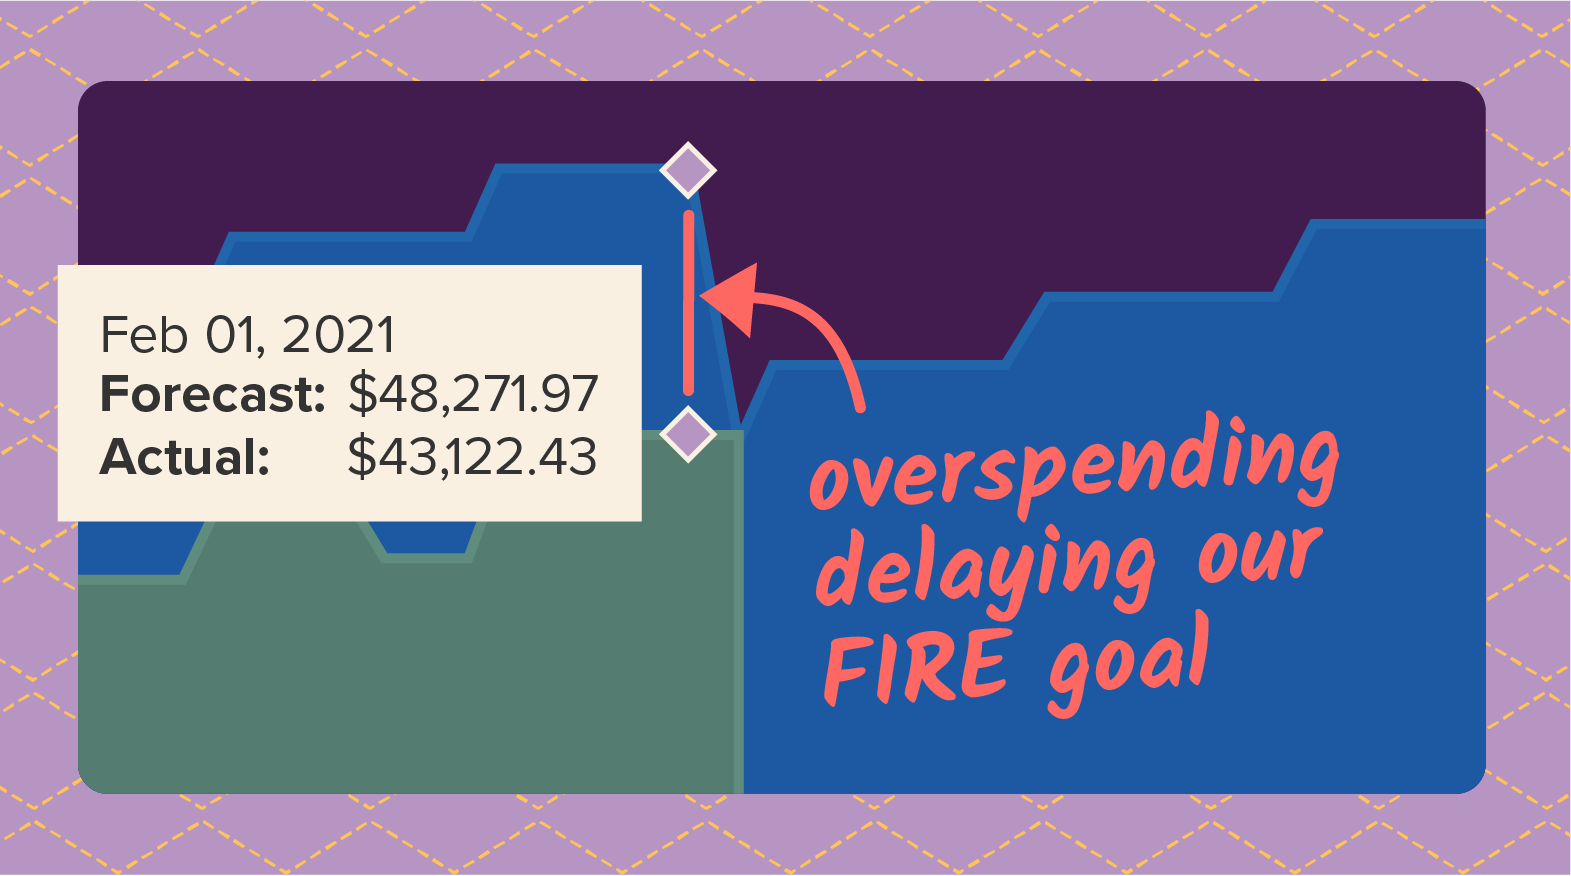 Check your forecast to see if overspending is delaying your FIRE goal